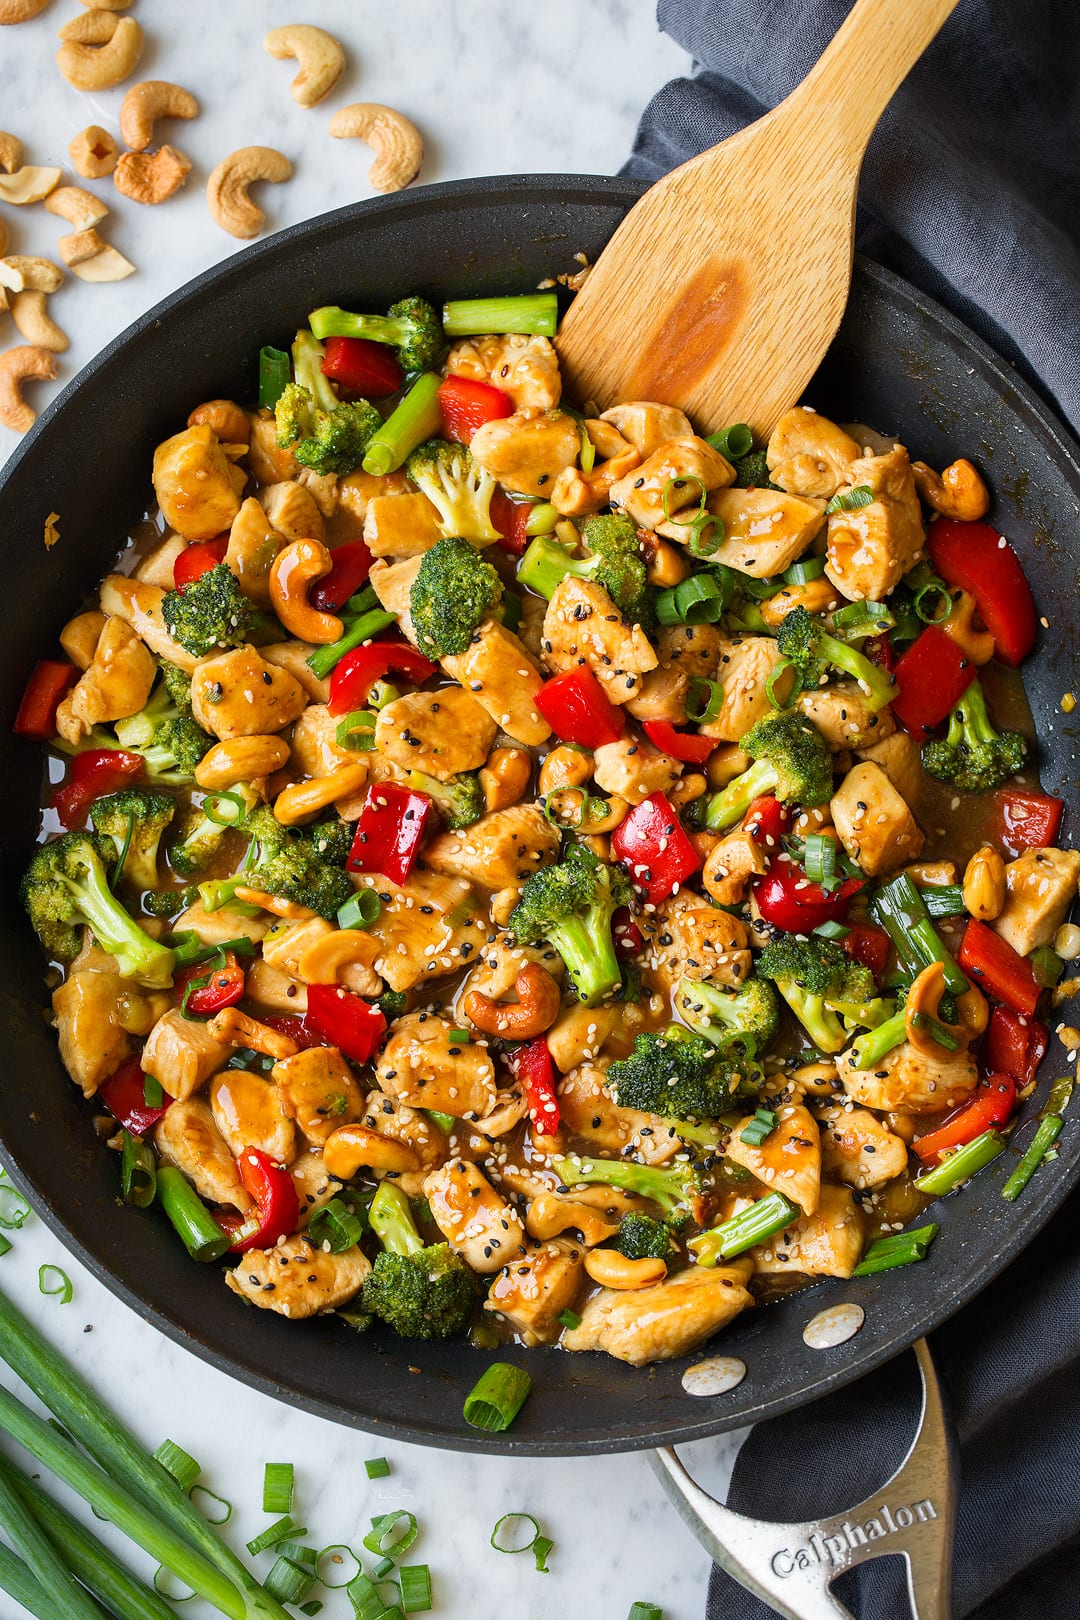 Cashew Chicken shown here in skillet. Includes chicken breasts pieces, broccoli, bell peppers and a sweet and tangy sauce.